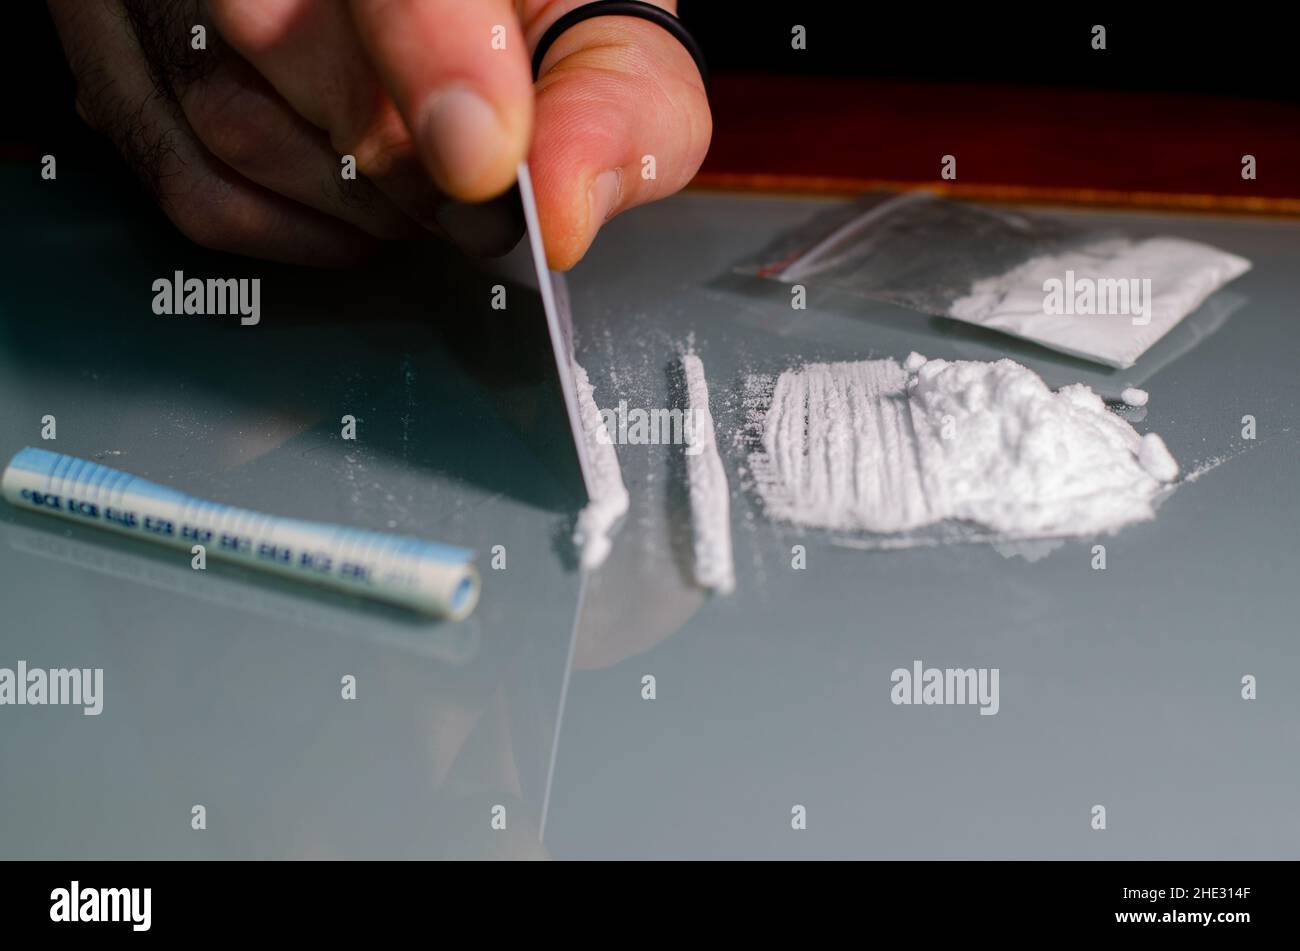 The man divides the cocaine into strips and then snorts. Narcotic concept. Stock Photo